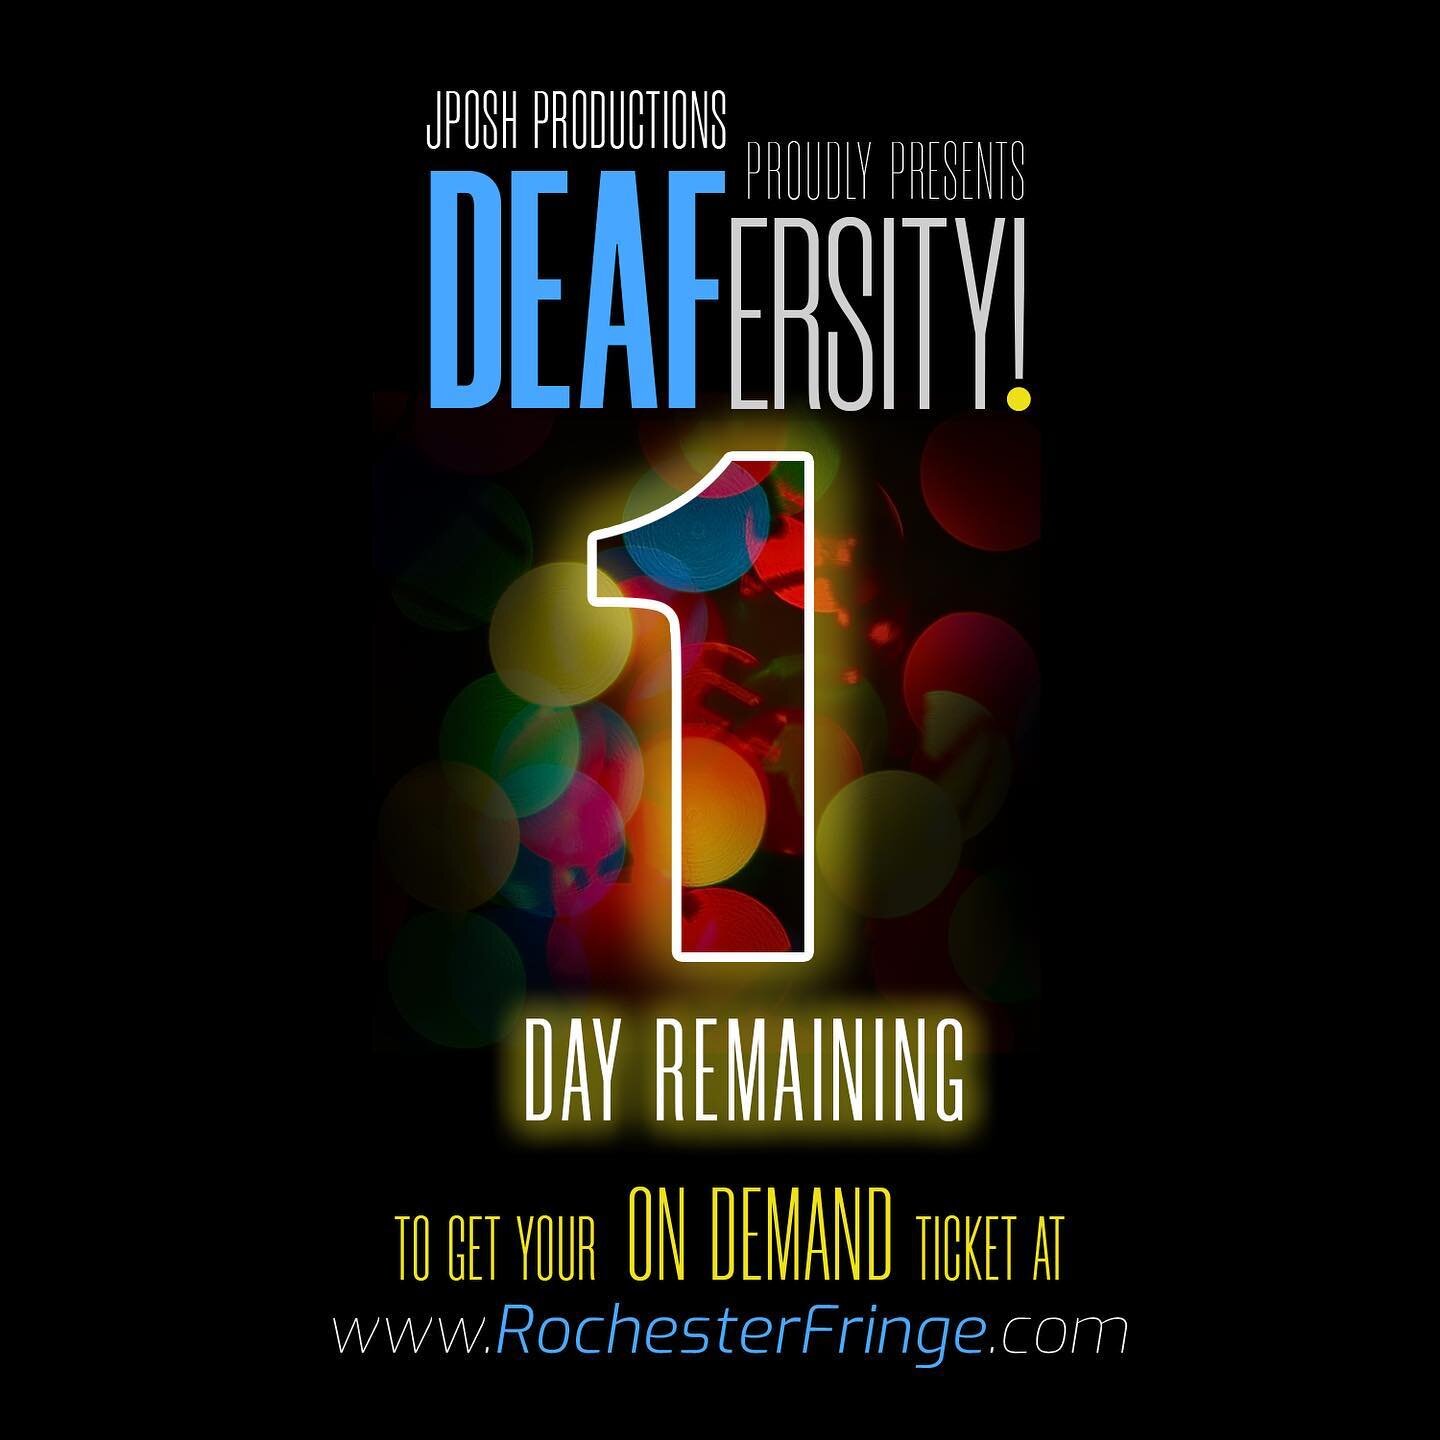 TOMORROW is the last day to purchase tickets, and celebrate International Week of the Deaf and Deaf Awareness Month with us!!! JPosh Productions proudly presents DEAFersity! and joins the 2020 Virtual Rochester Fringe Festival vía On Demand.

Ticket